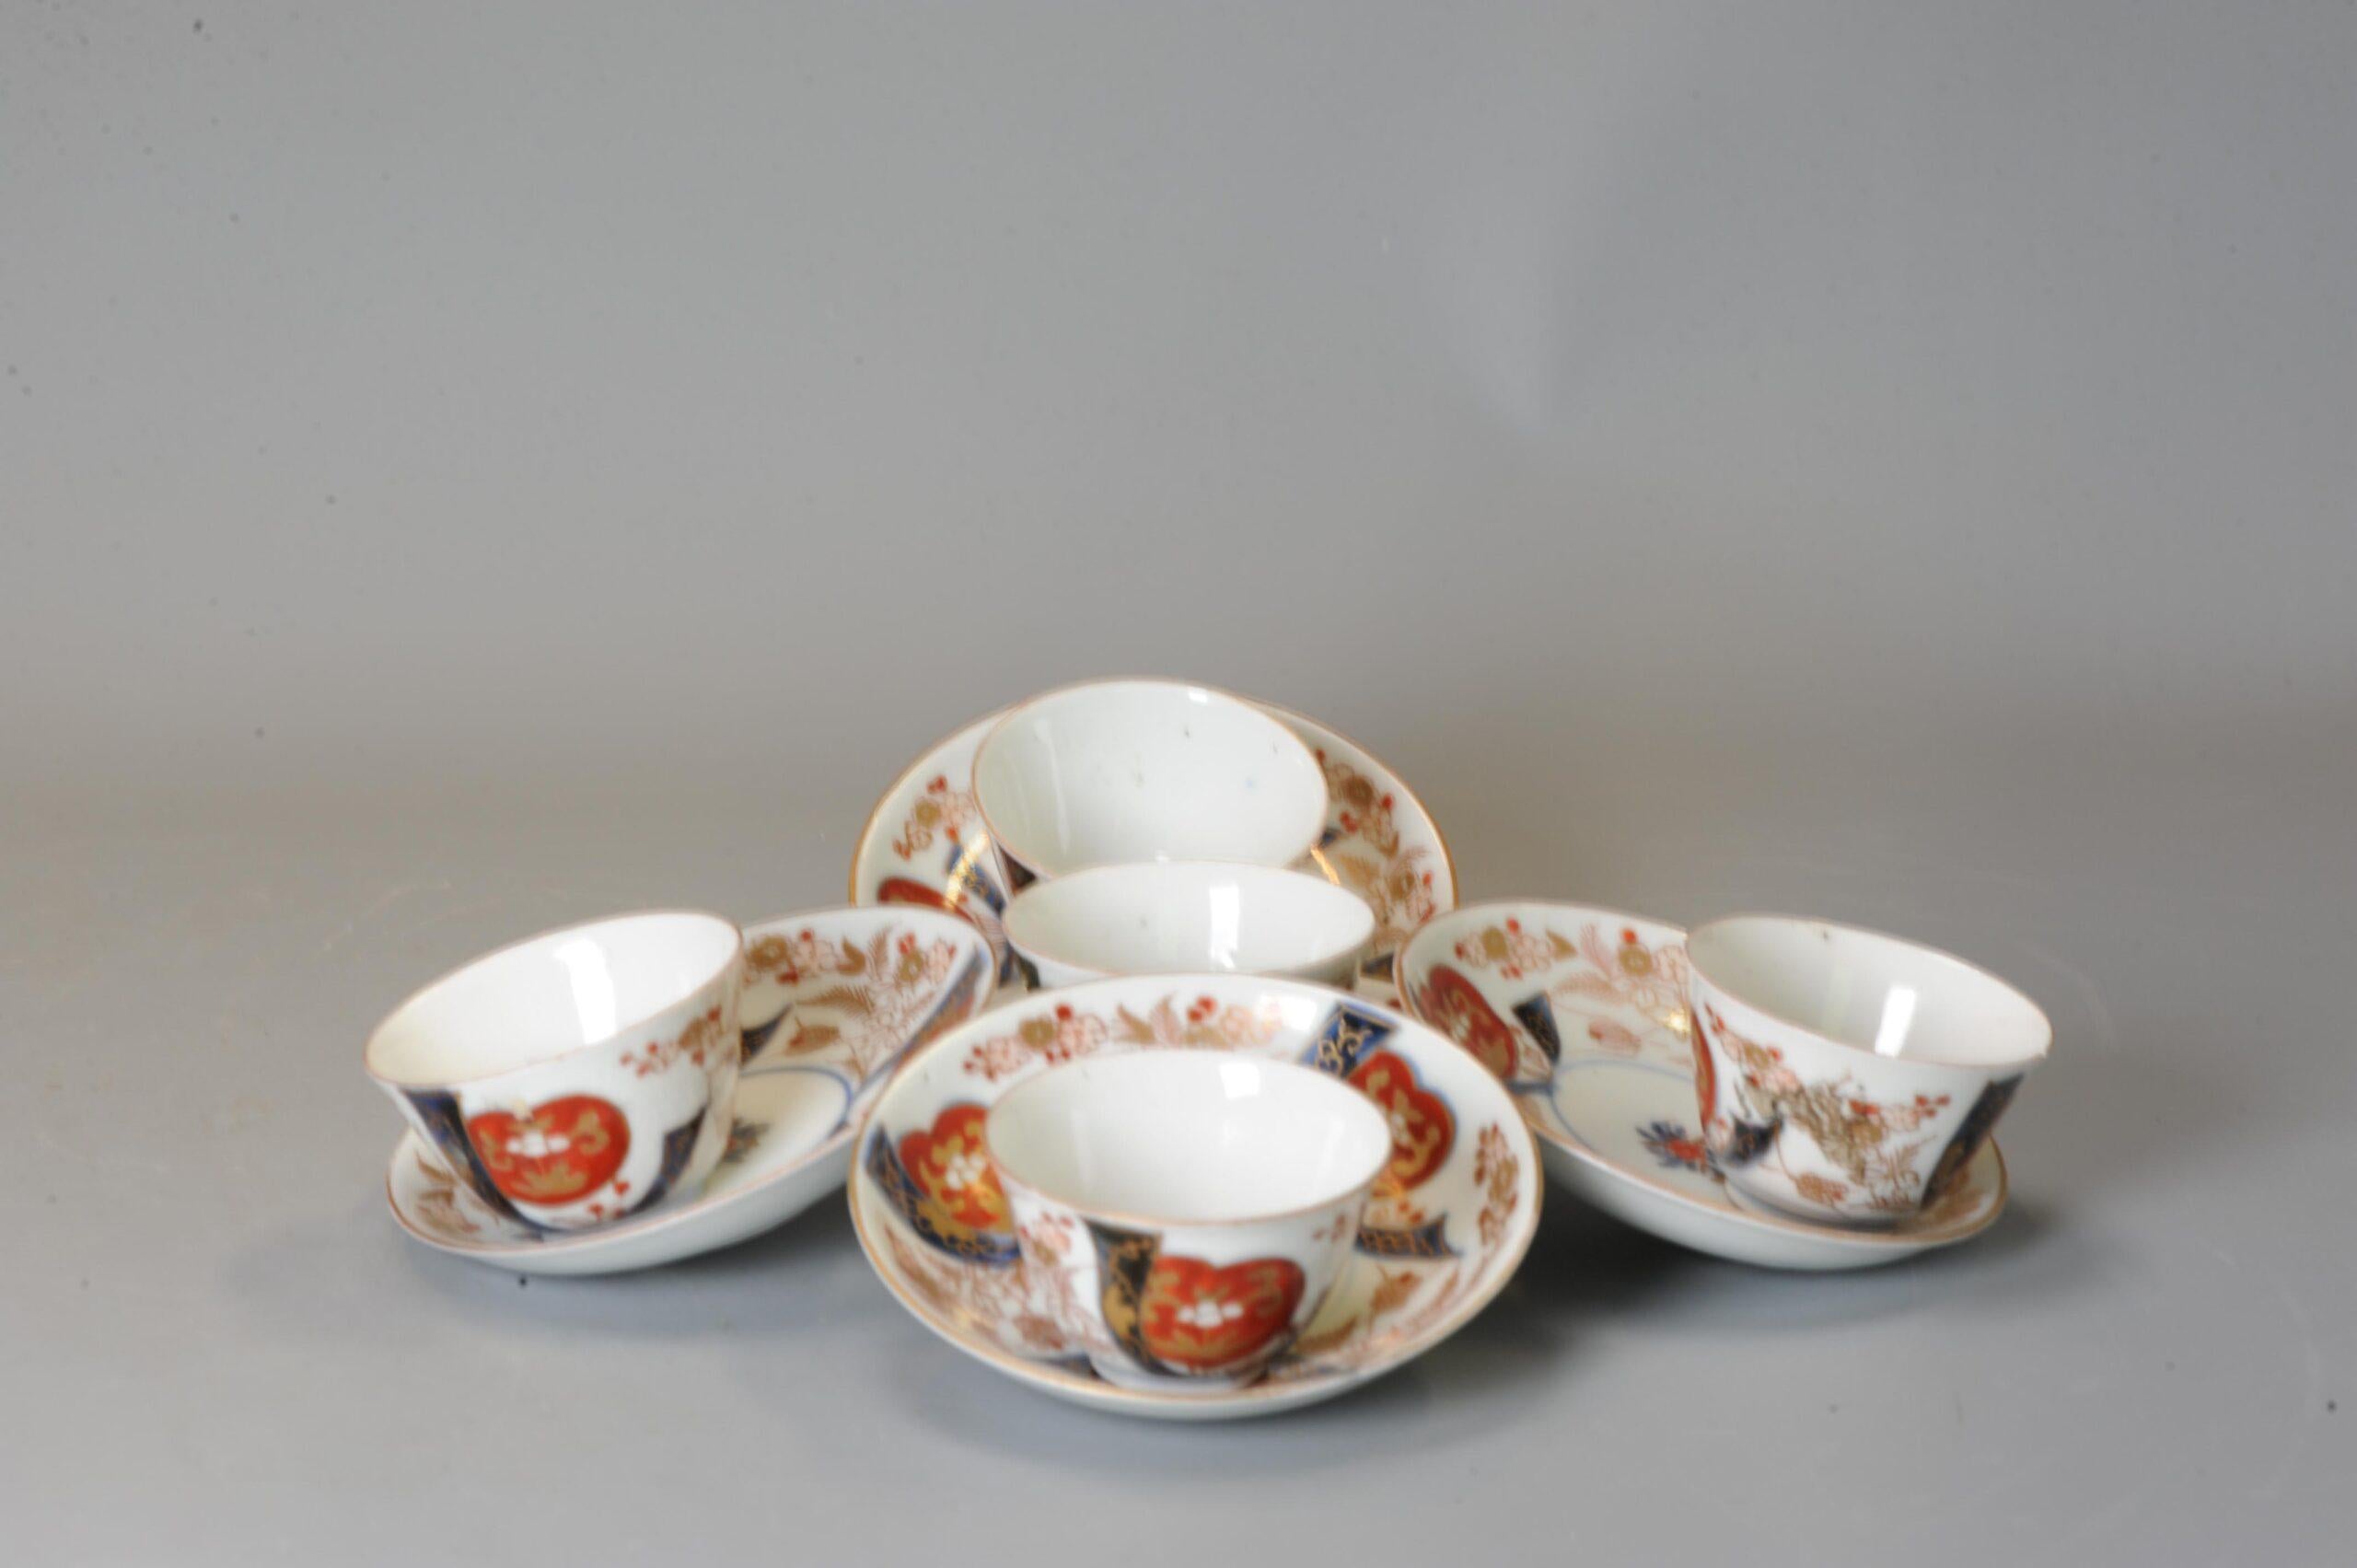 Set of 5 Antique Japanese Porcelain Edo Period Tea Bowls Floral Imari In Good Condition For Sale In Amsterdam, Noord Holland